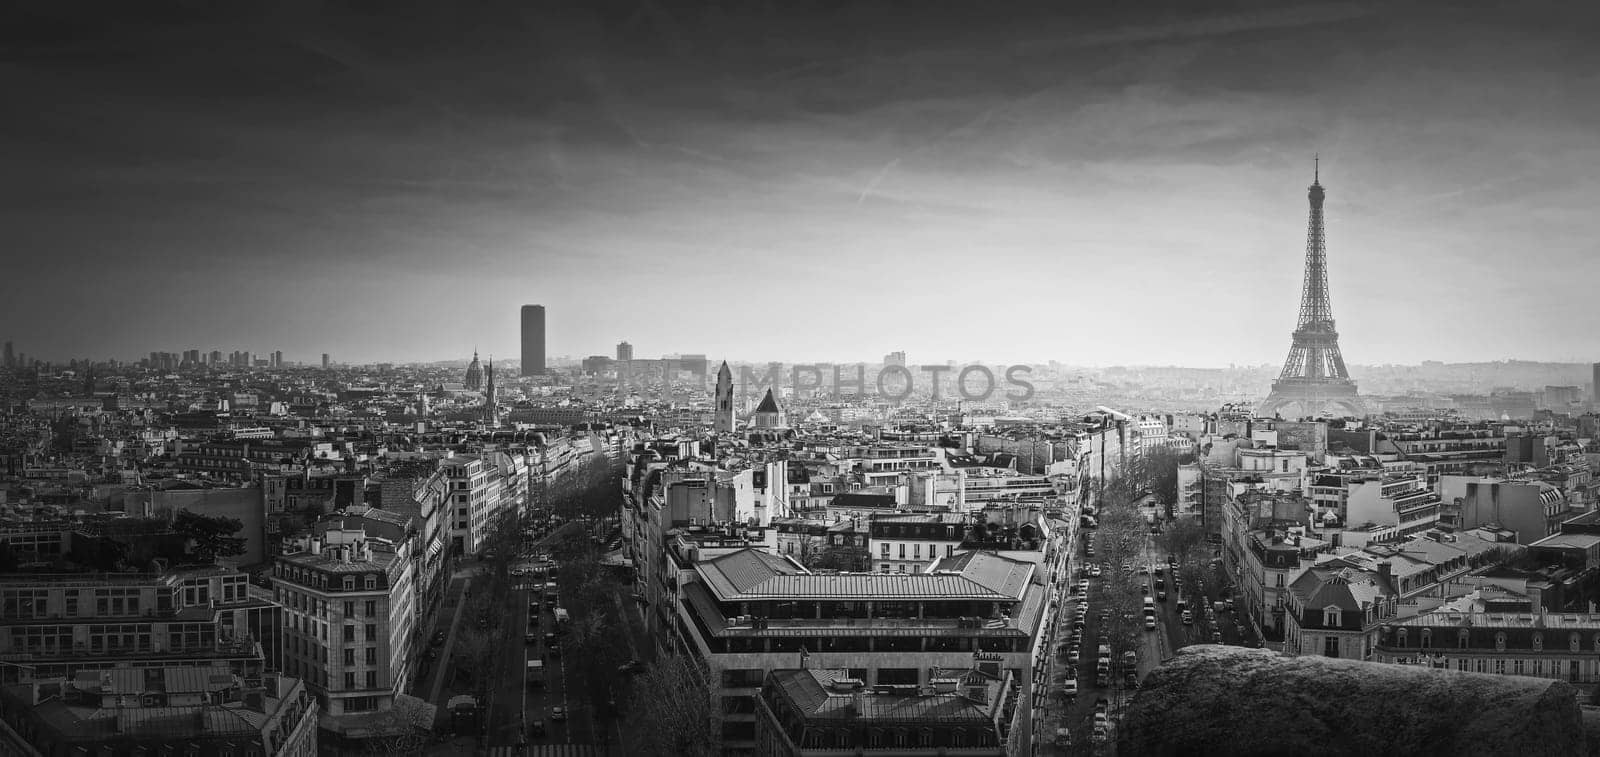 Black and white Paris panorama. Romantic aerial view over rooftops to the Eiffel Tower, France. Holiday destination, sightseeing parisian cityscape scene, historic landmarks on the horizon by psychoshadow